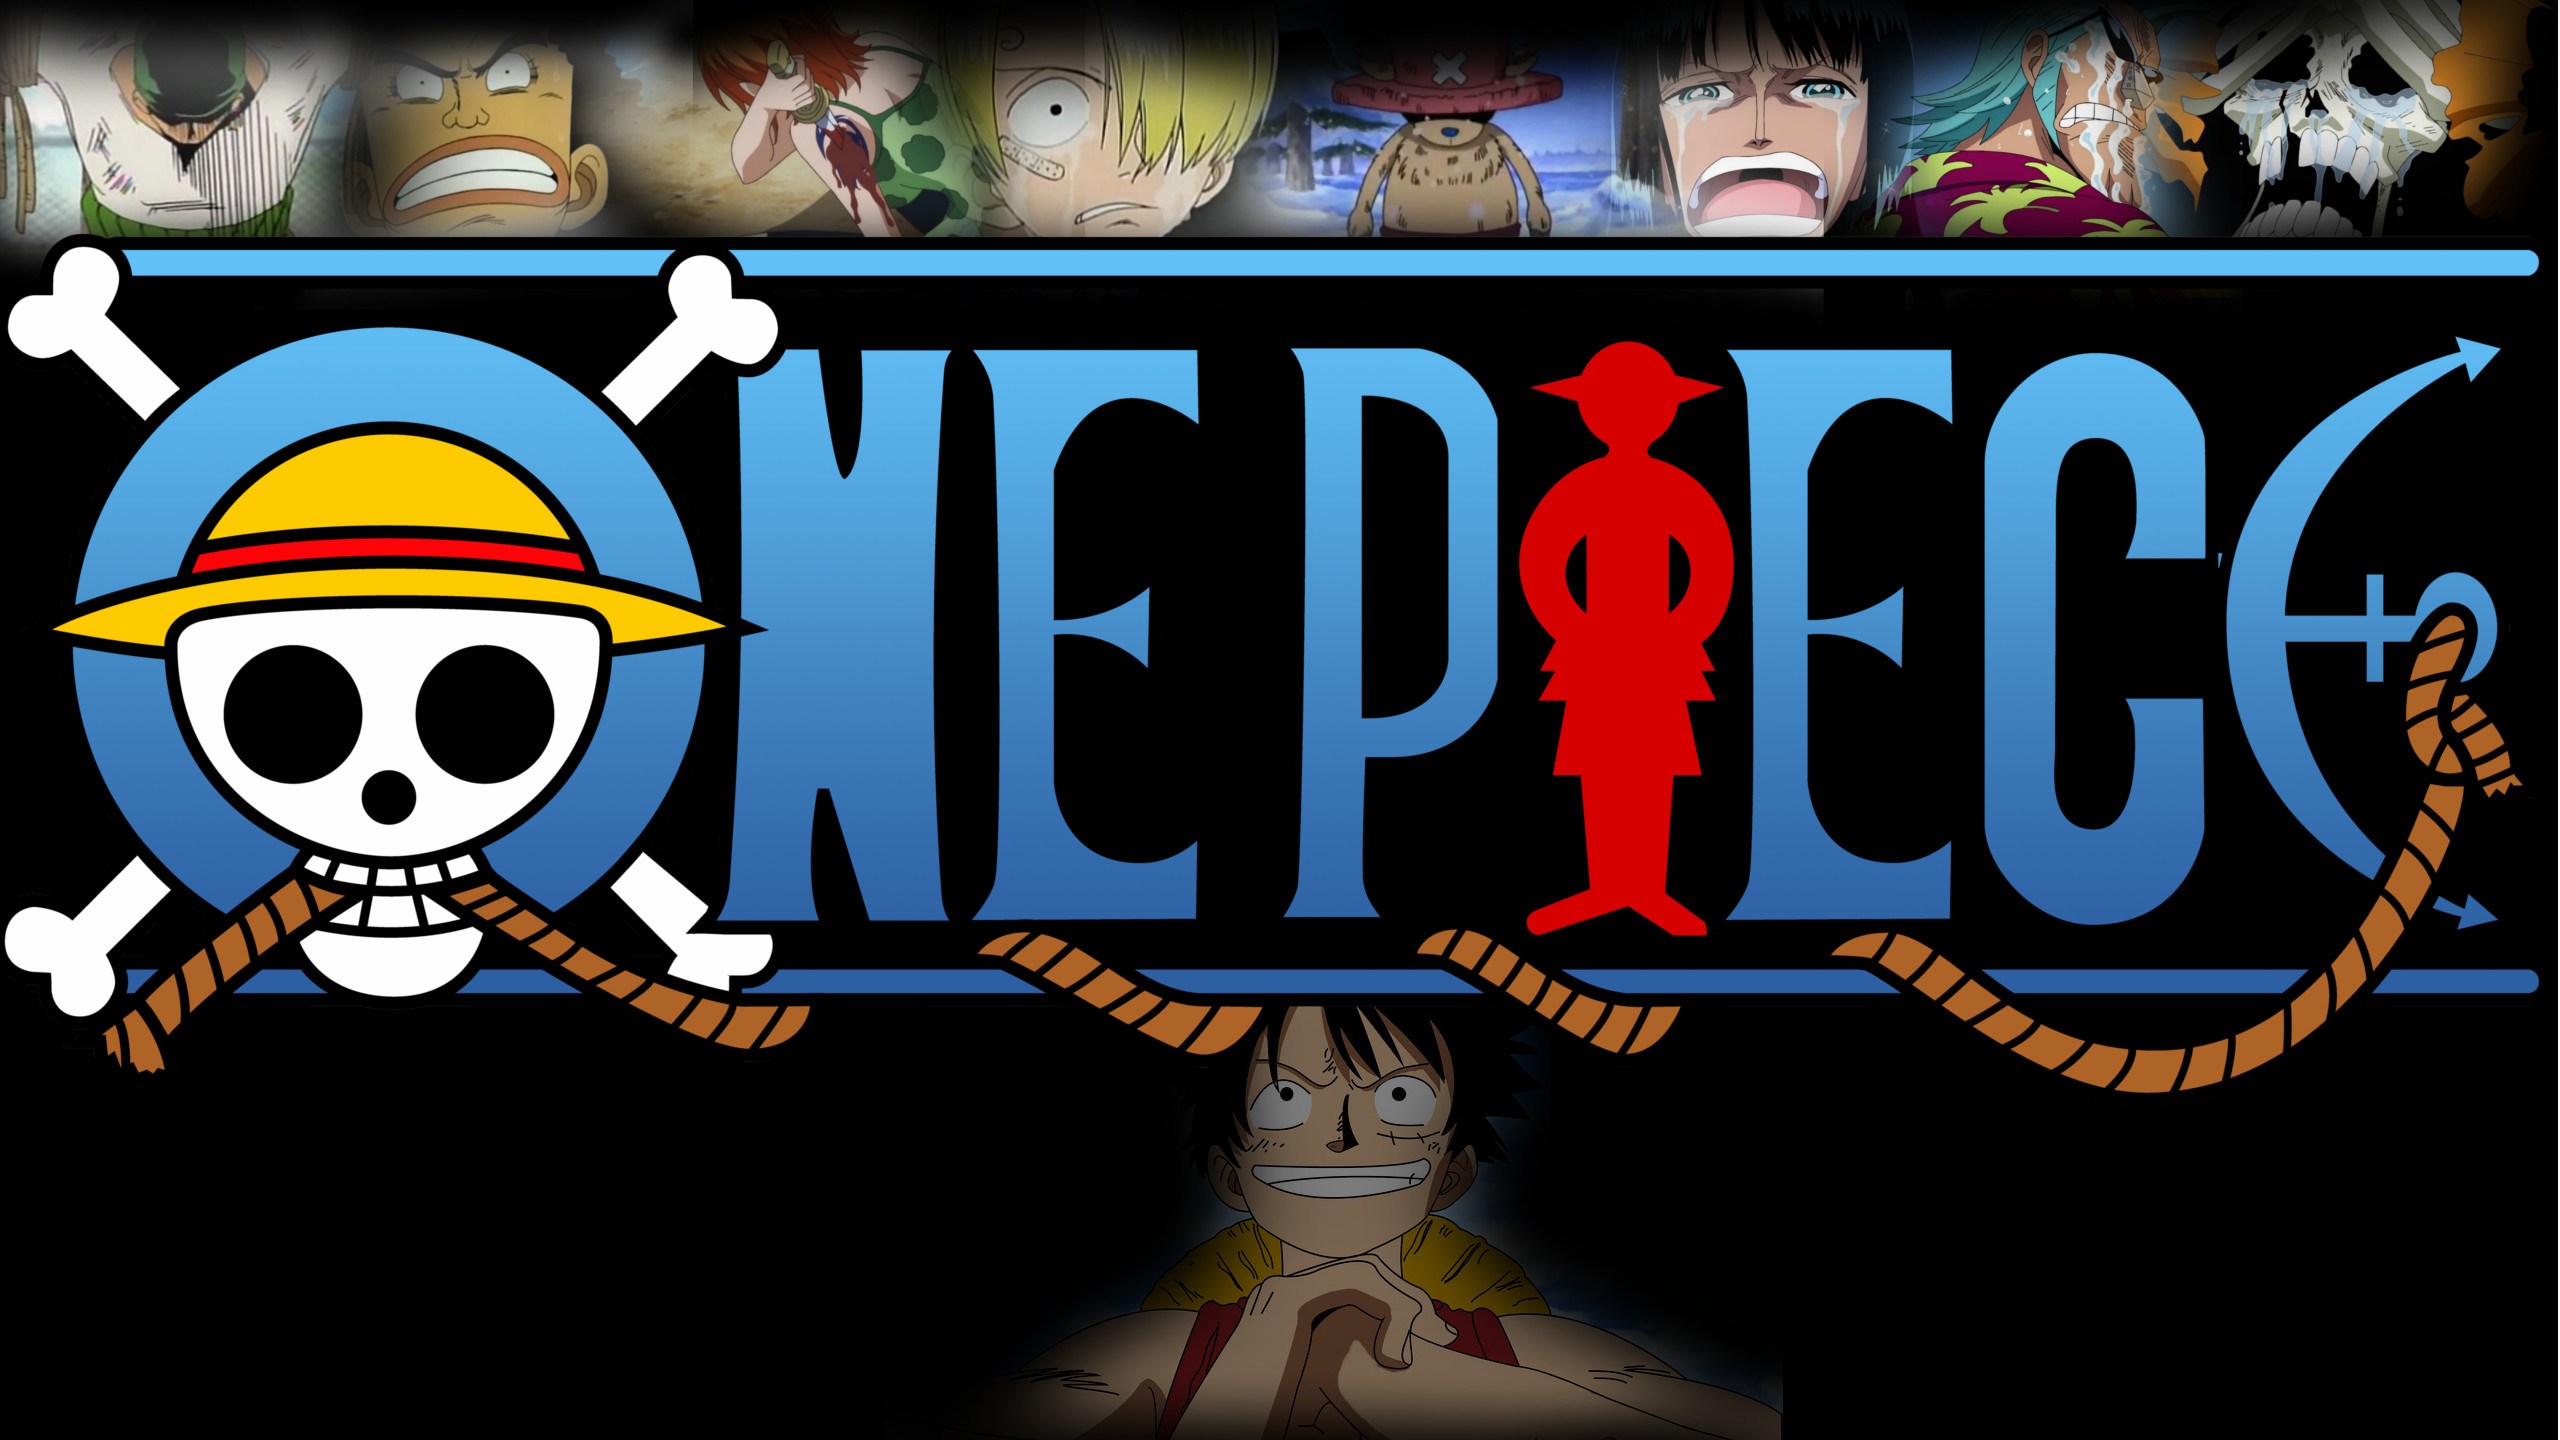 Android Hd Source - One Piece , HD Wallpaper & Backgrounds